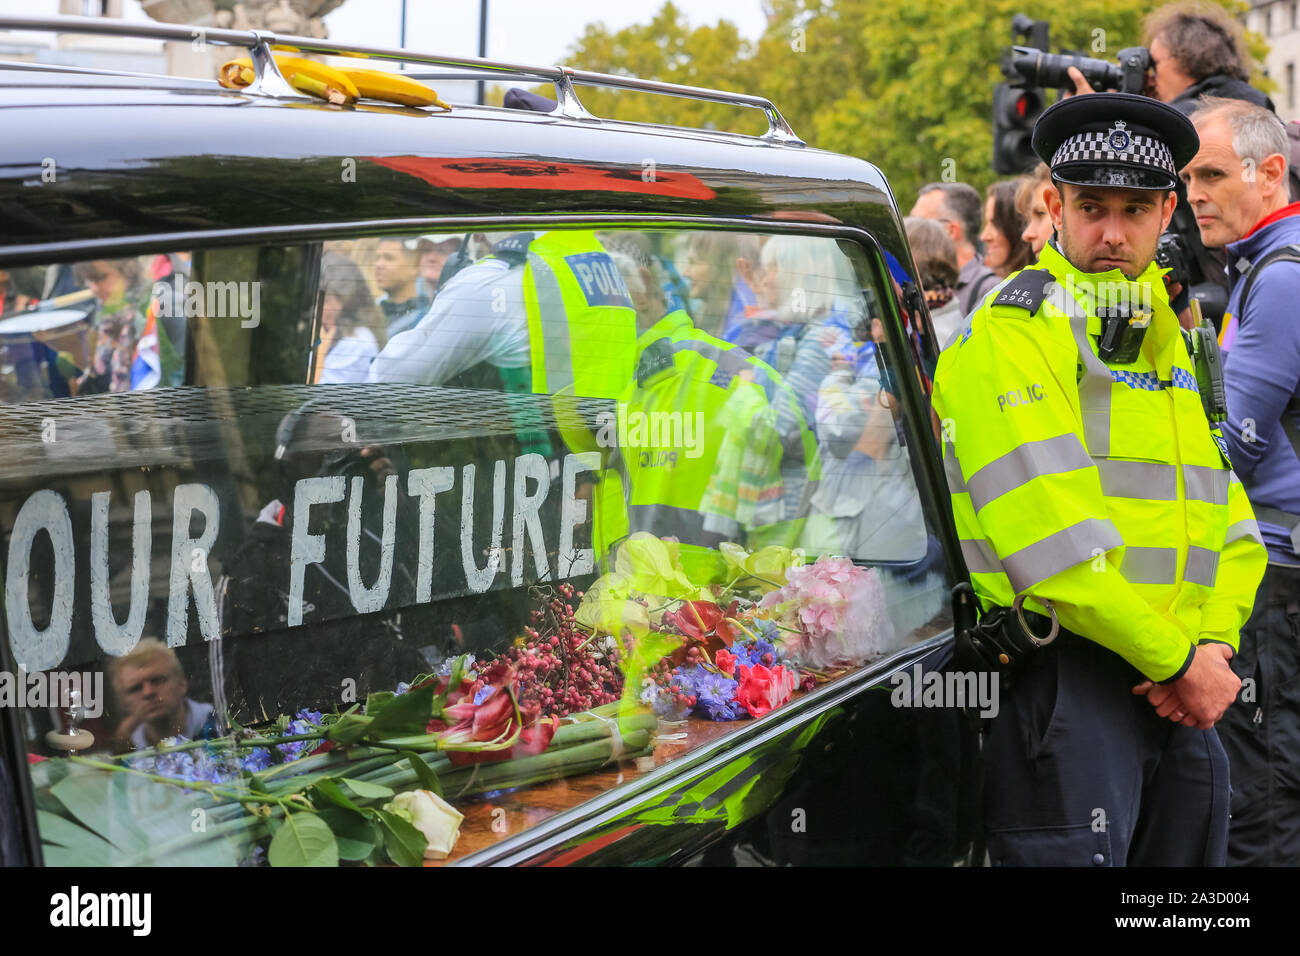 London, UK. 07th Oct, 2019. Two protesters have chained themselves into a funeral hearse complete with coffin, incscribed 'Our Future'. Climate activists from Extinction Rebellion have staged a number of protests at various sites in Westminster, including Bridges and several government ministries, to raise awareness on global climate emergency issues. Credit: Imageplotter/Alamy Live News Stock Photo